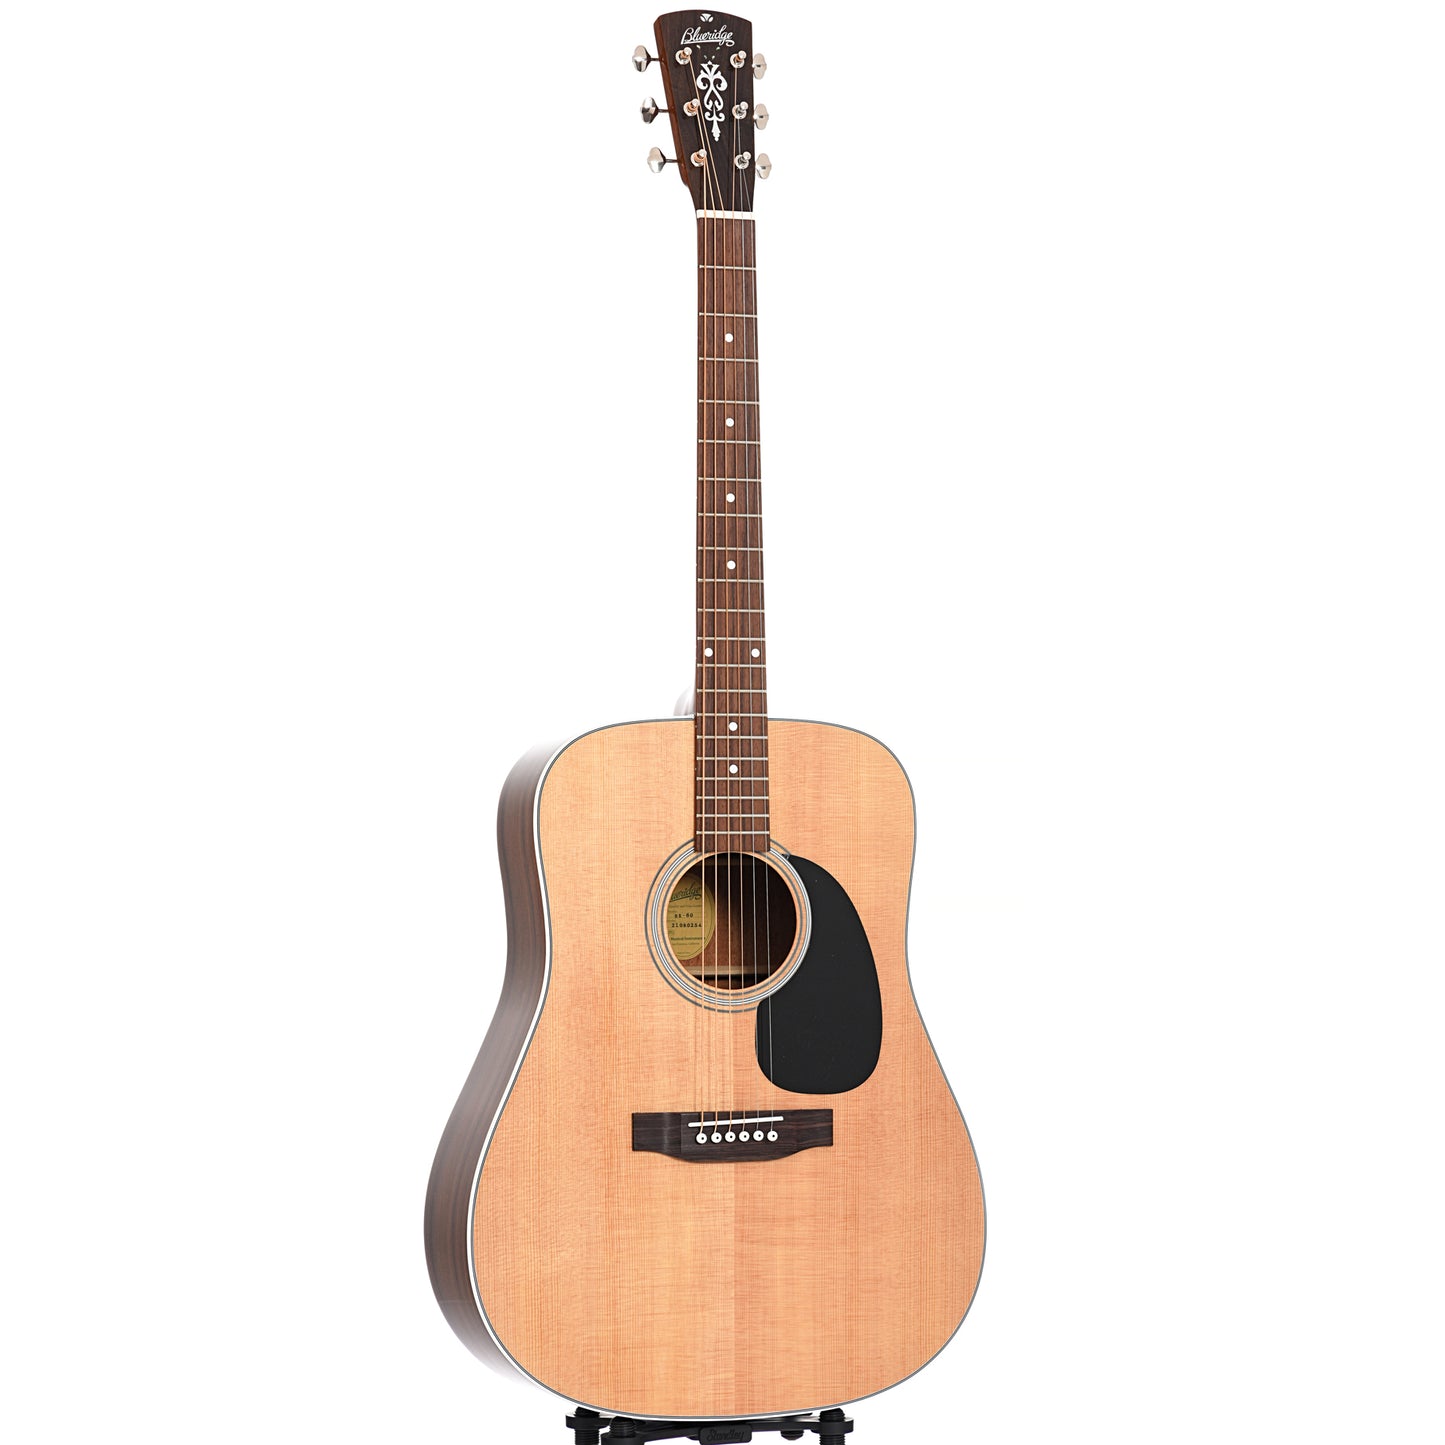 Full front and side of Blueridge Contemporary Series BR-60 Dreadnought